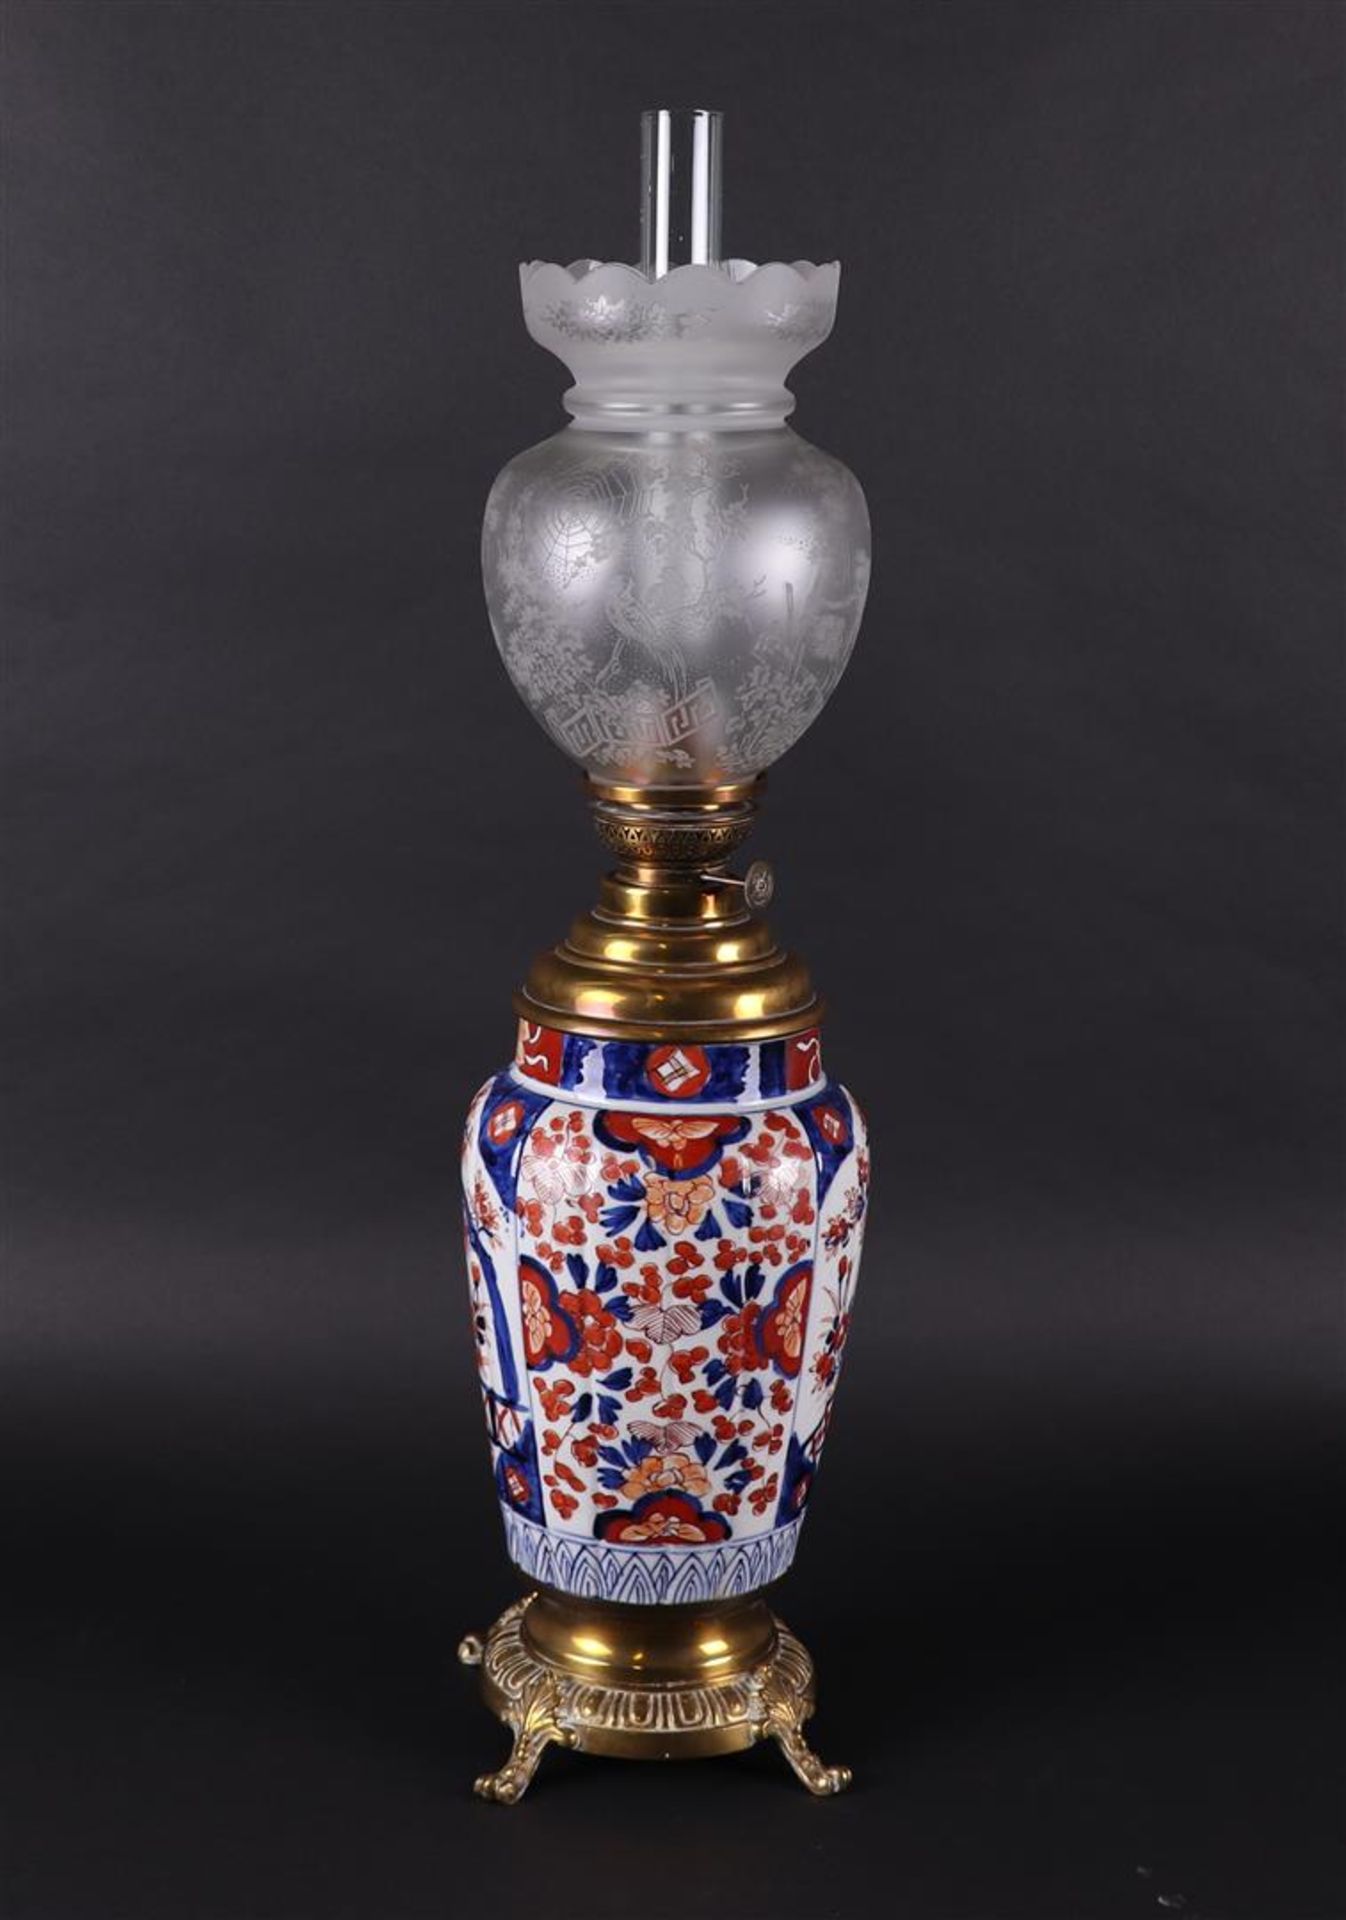 And a porcelain Imari vase converted into an oil lamp. Japan, 19th century.